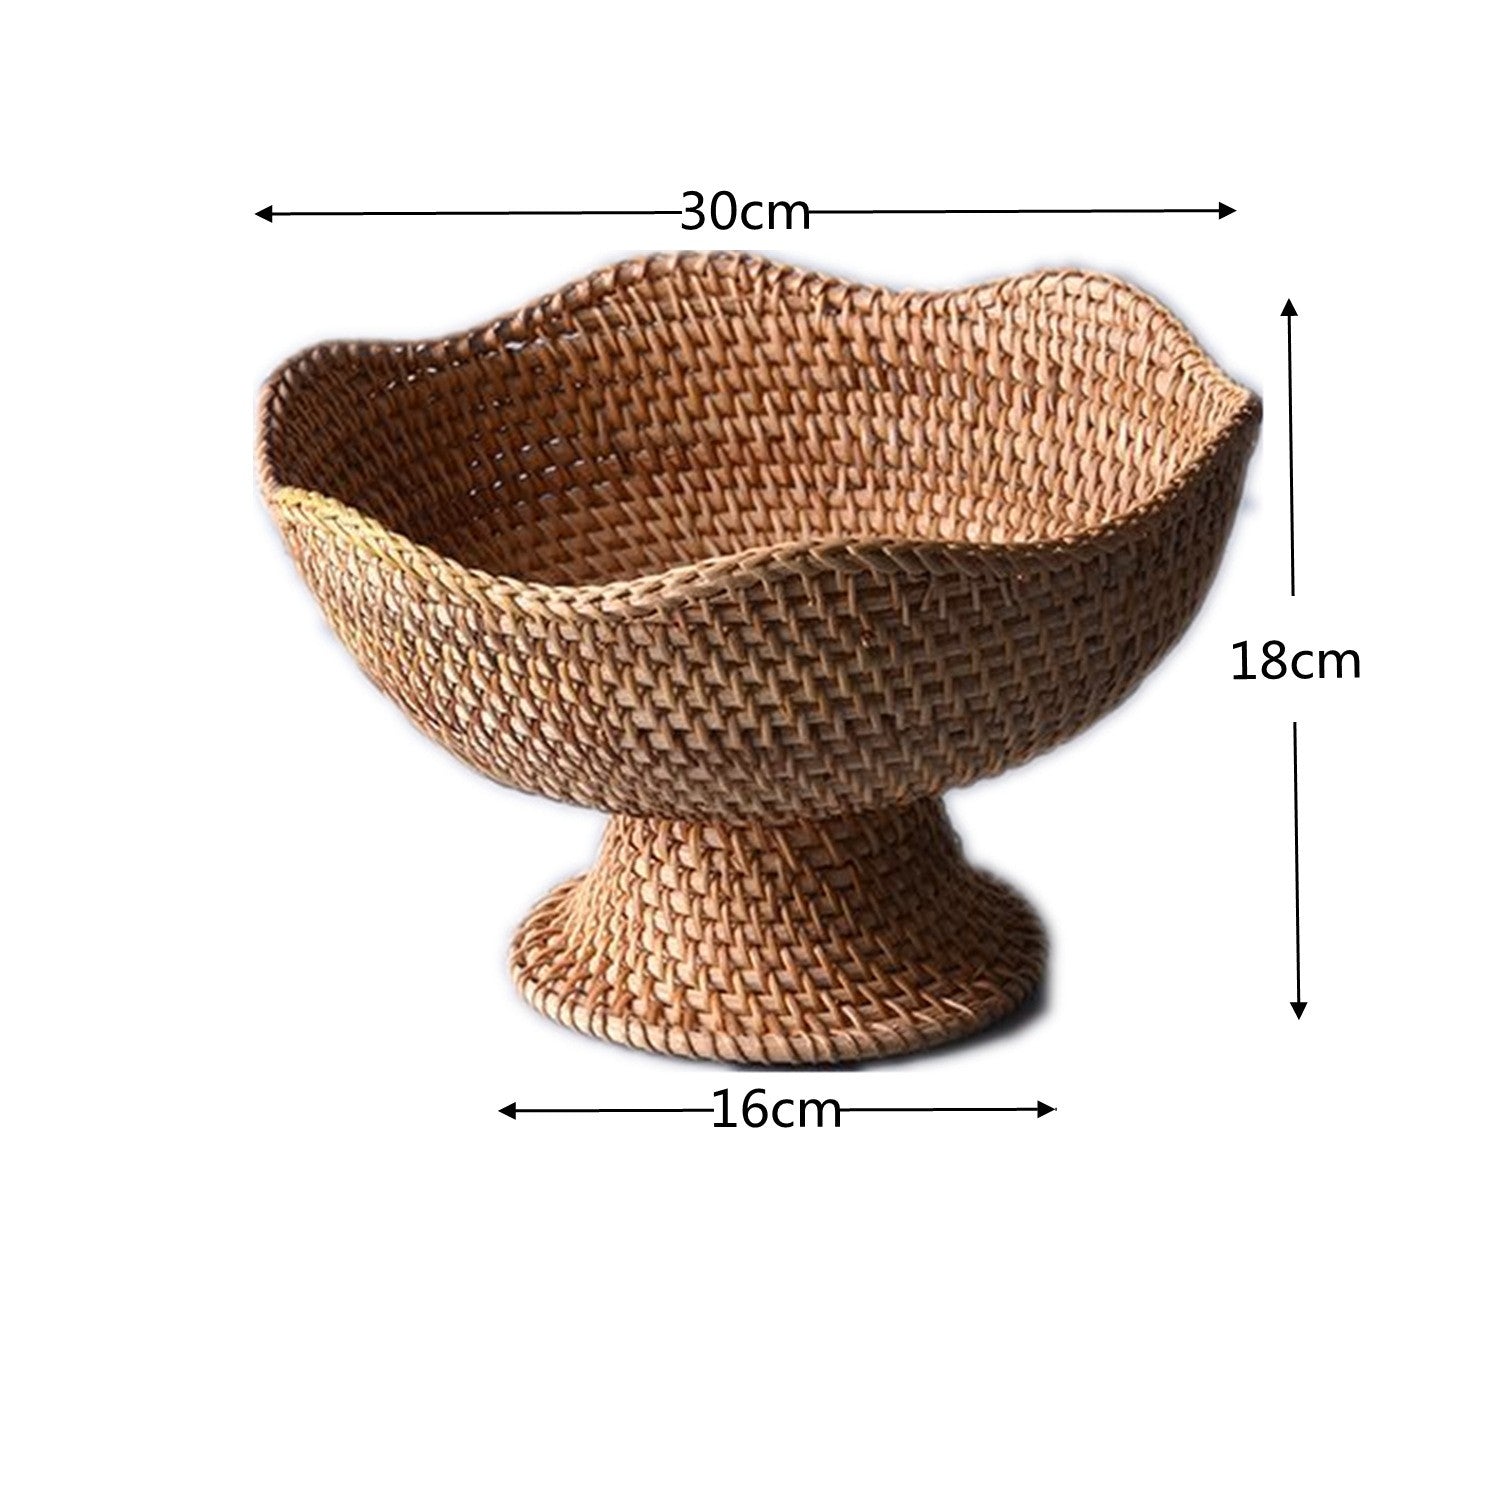 Footed Fruit Rattan Bowl